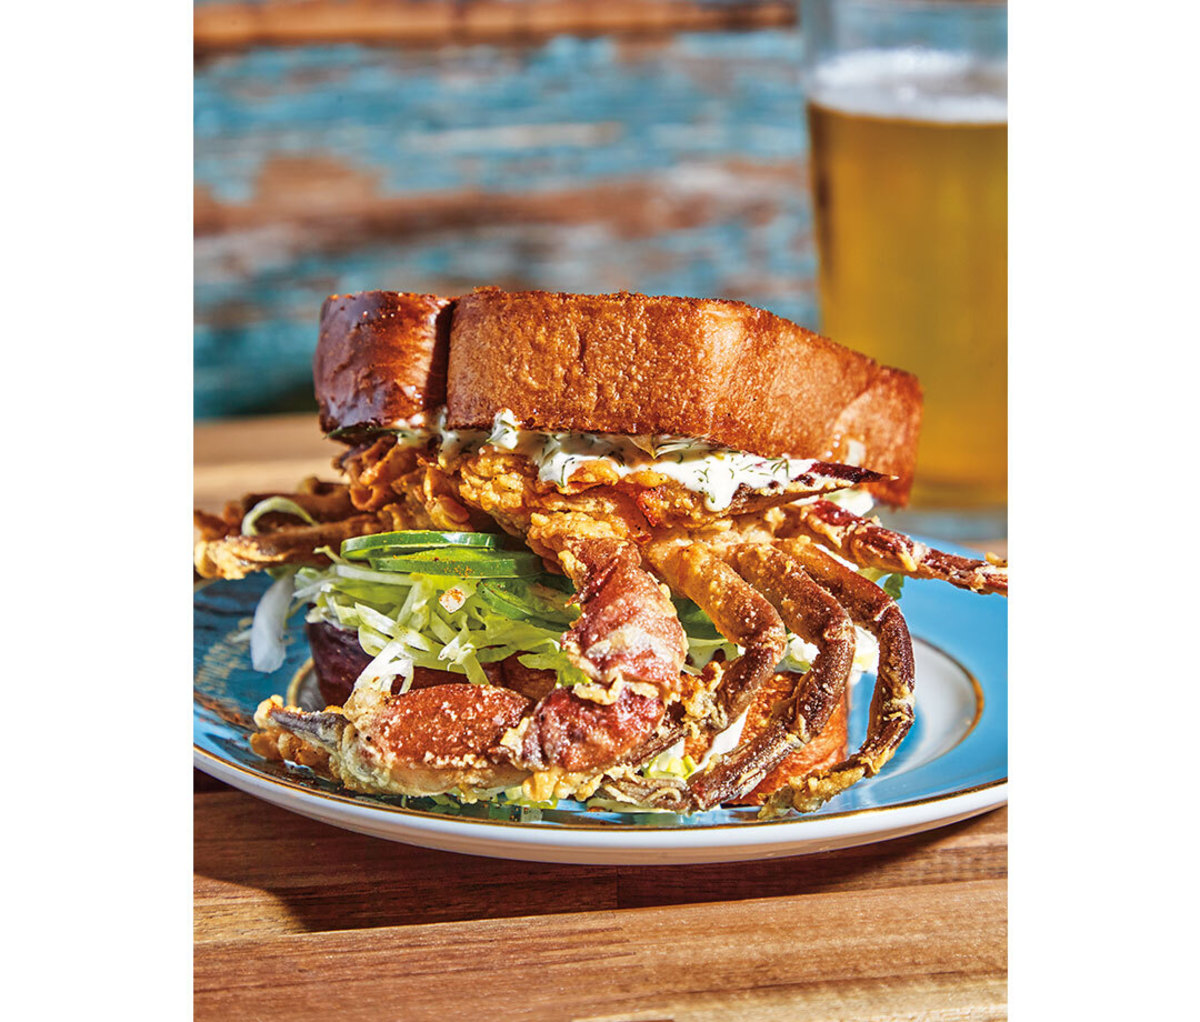 Soft-shell crab sandwich on thick white bread